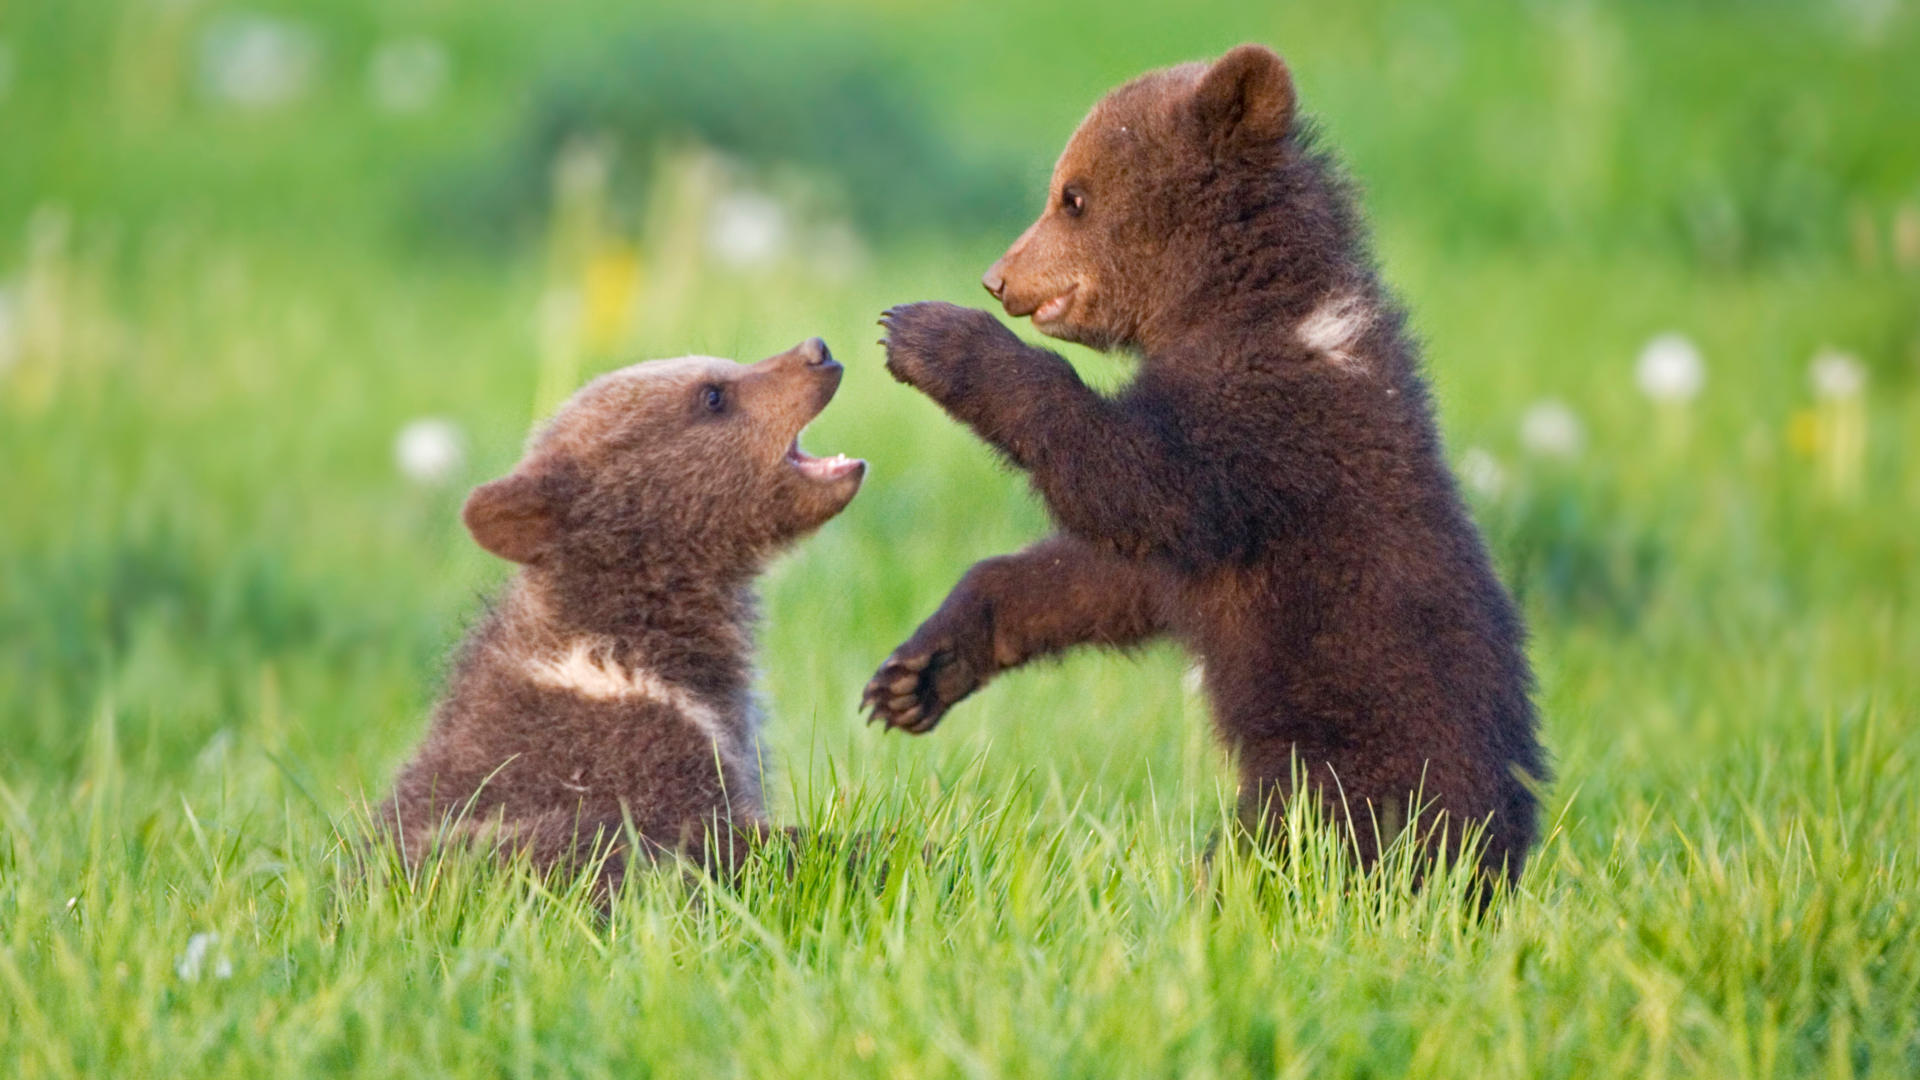 two bear cubs play fighting